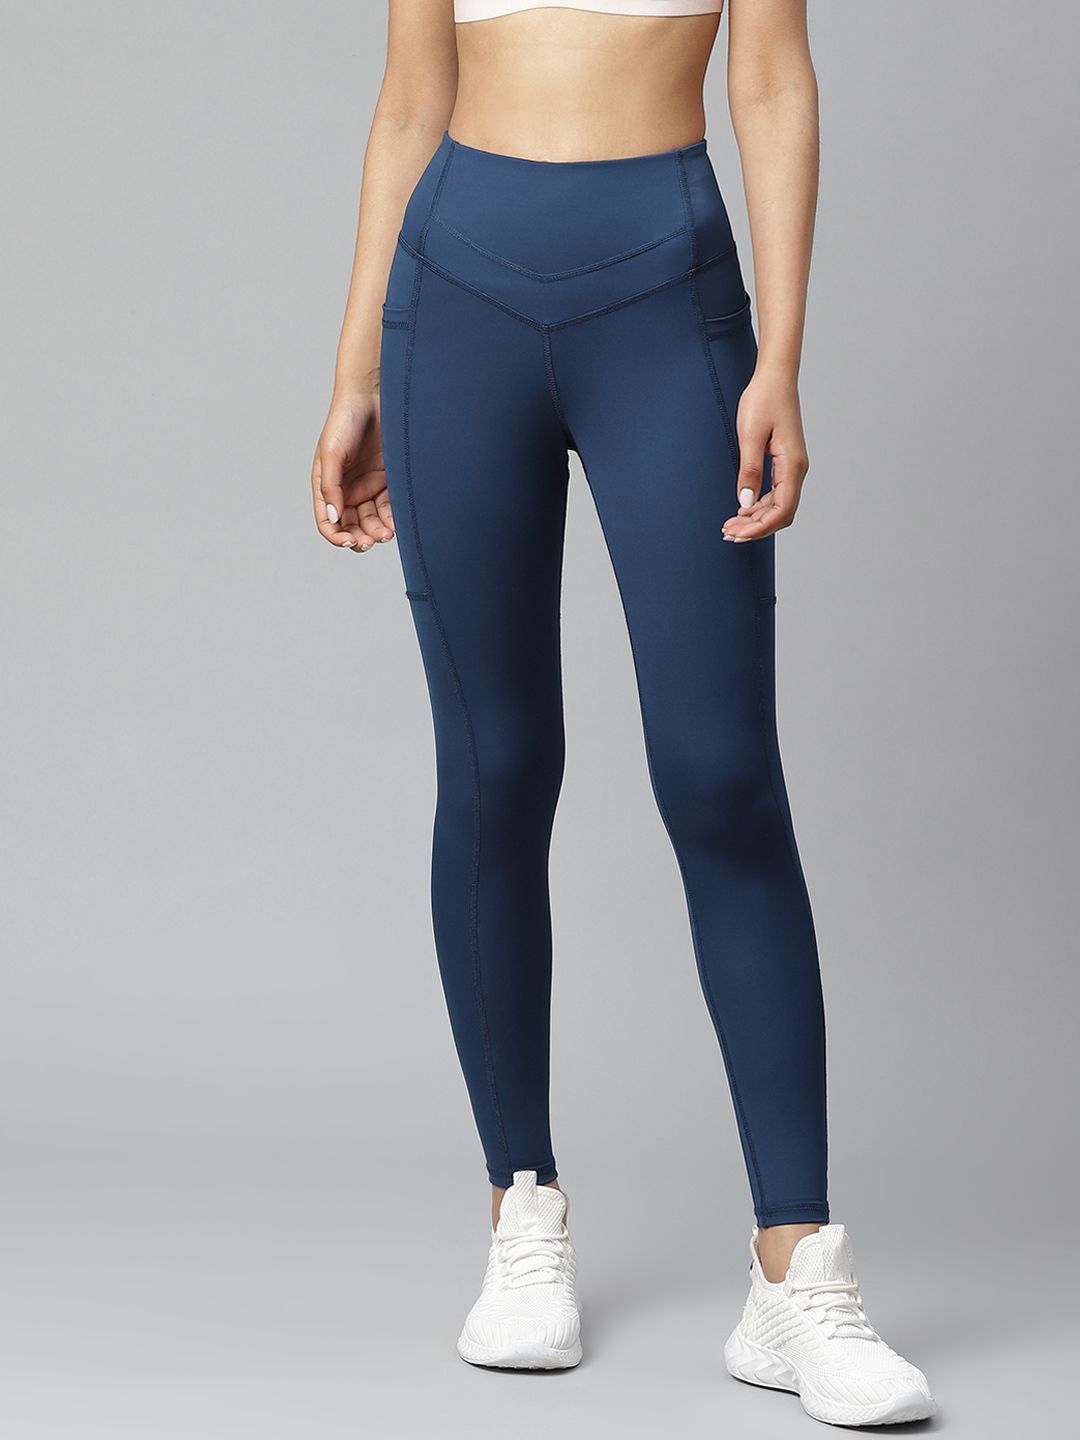 skyria Women Blue Solid Hight Rise TechDry Gym Tights Price in India